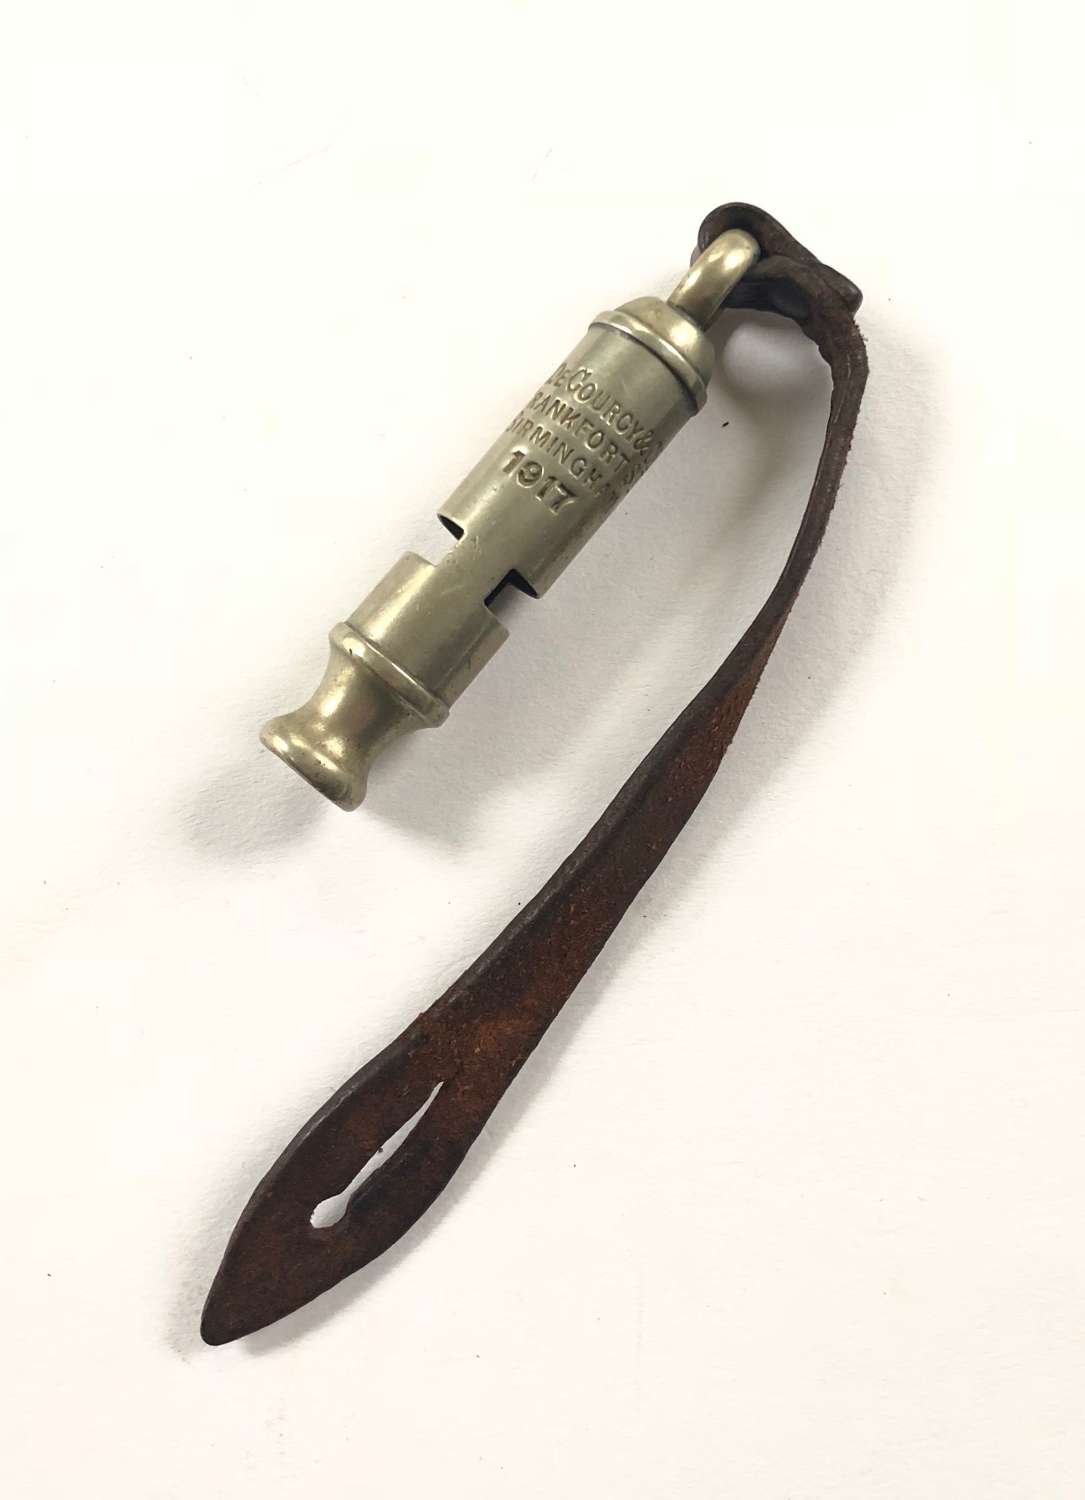 WW1 1917 British Officer's Trench Whistle & Strap.